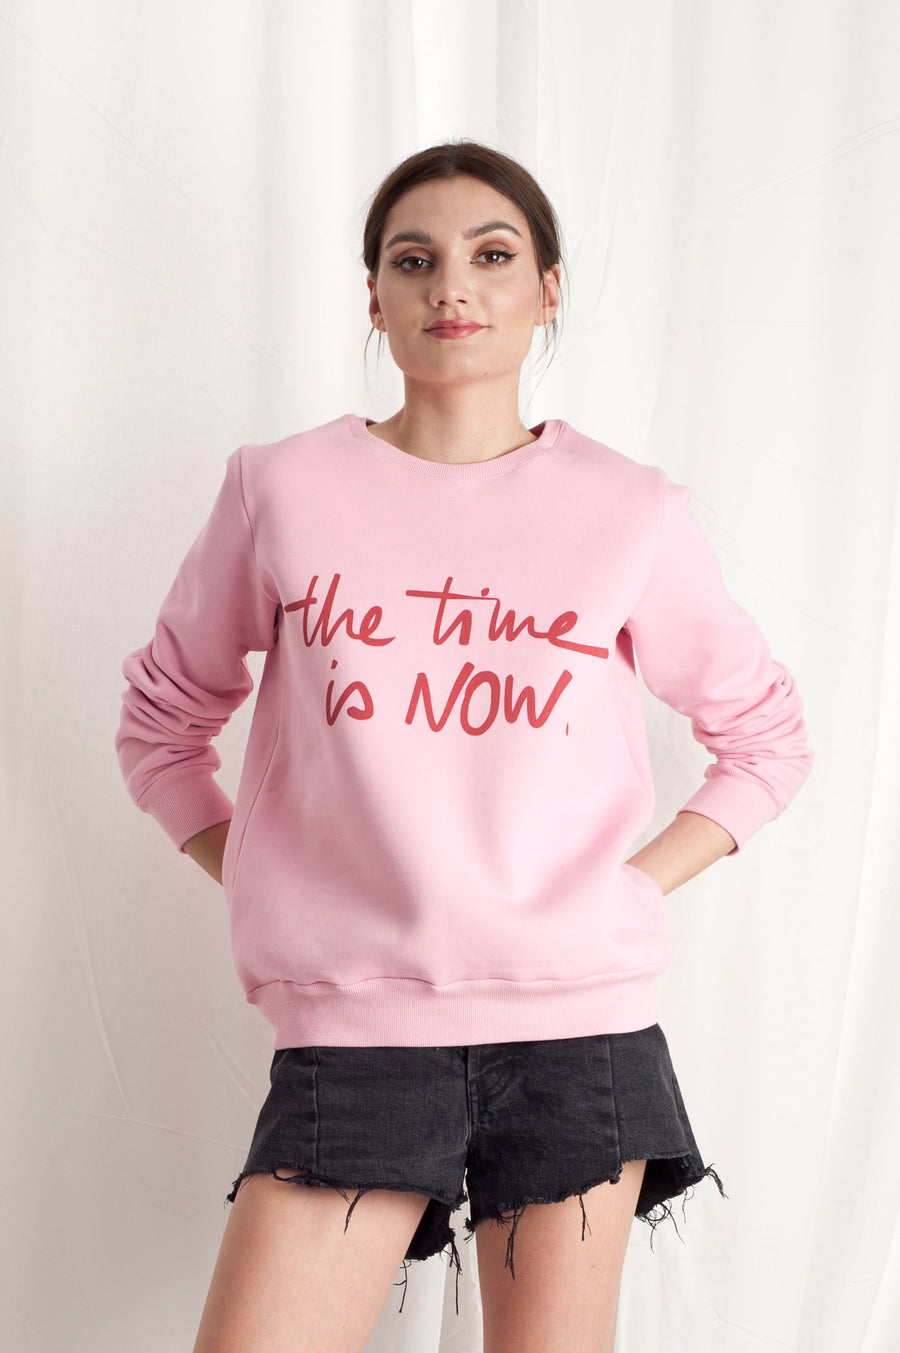 THE TIME IS NOW sweatshirt